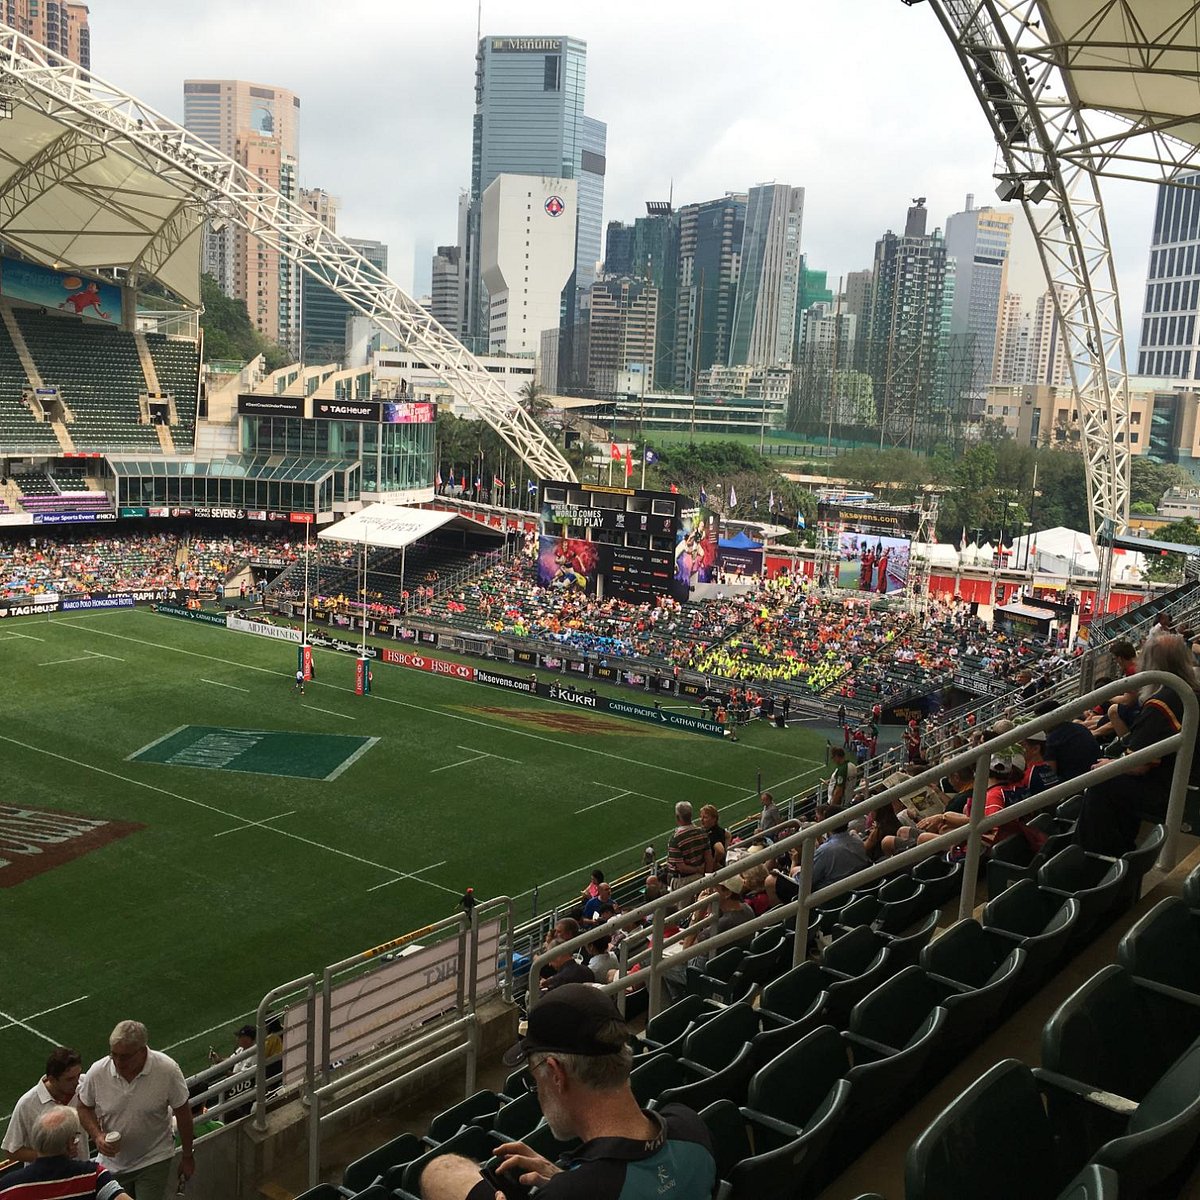 Hong Kong Sevens All You Need to Know BEFORE You Go